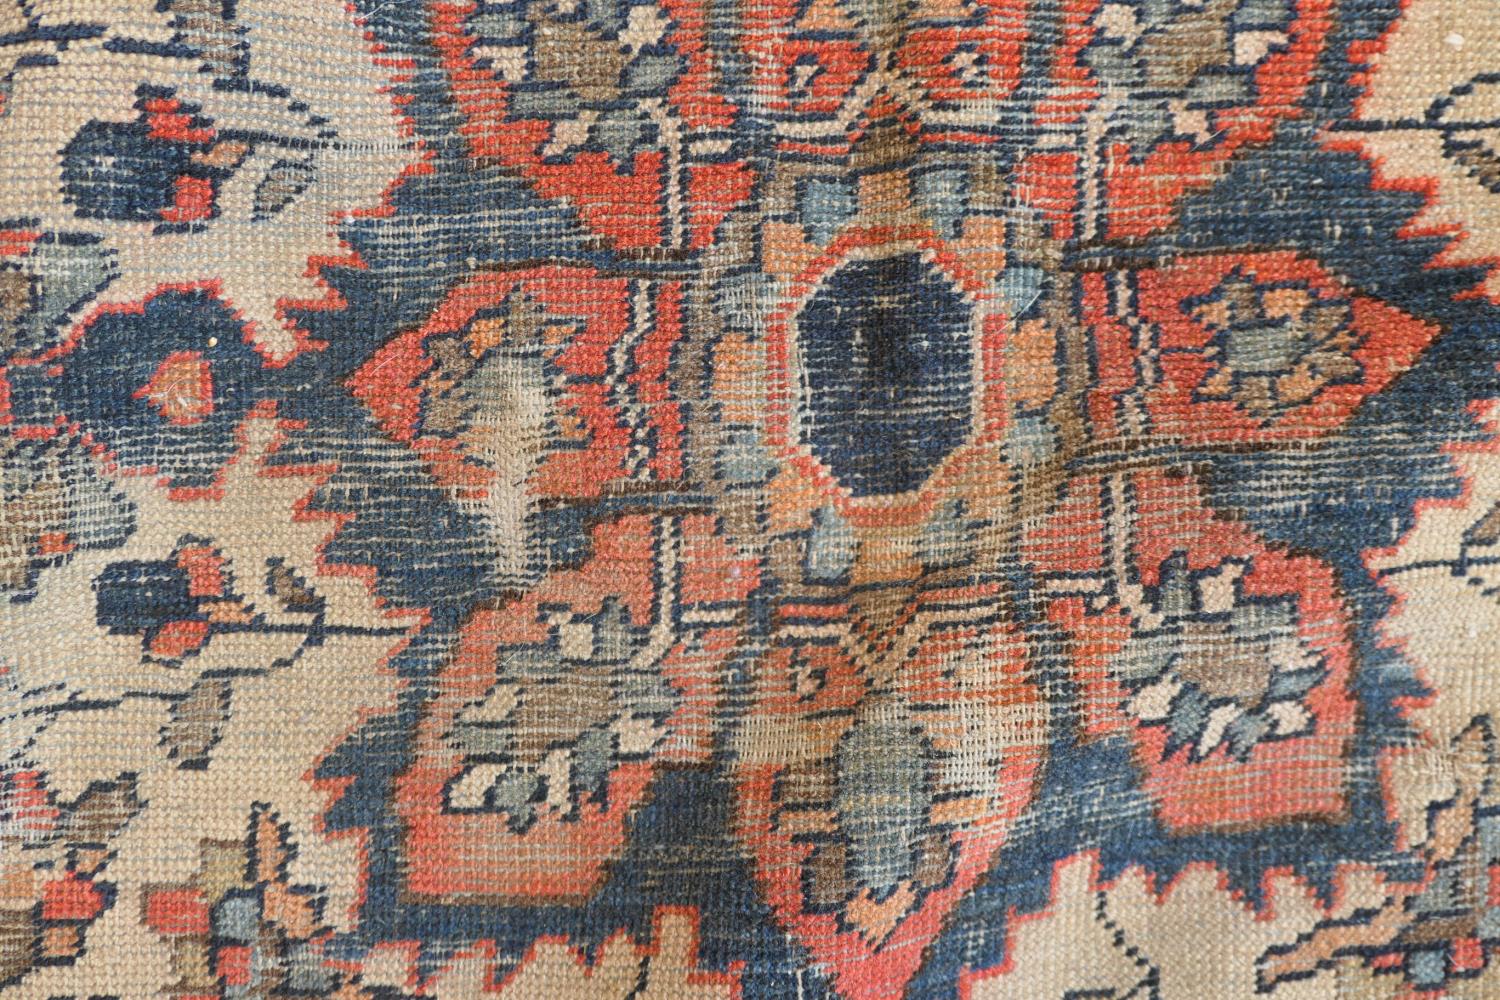 Persian Malayer woollen rug, late 19th Century, centred with a red flowerhead motif within a fawn - Image 6 of 9